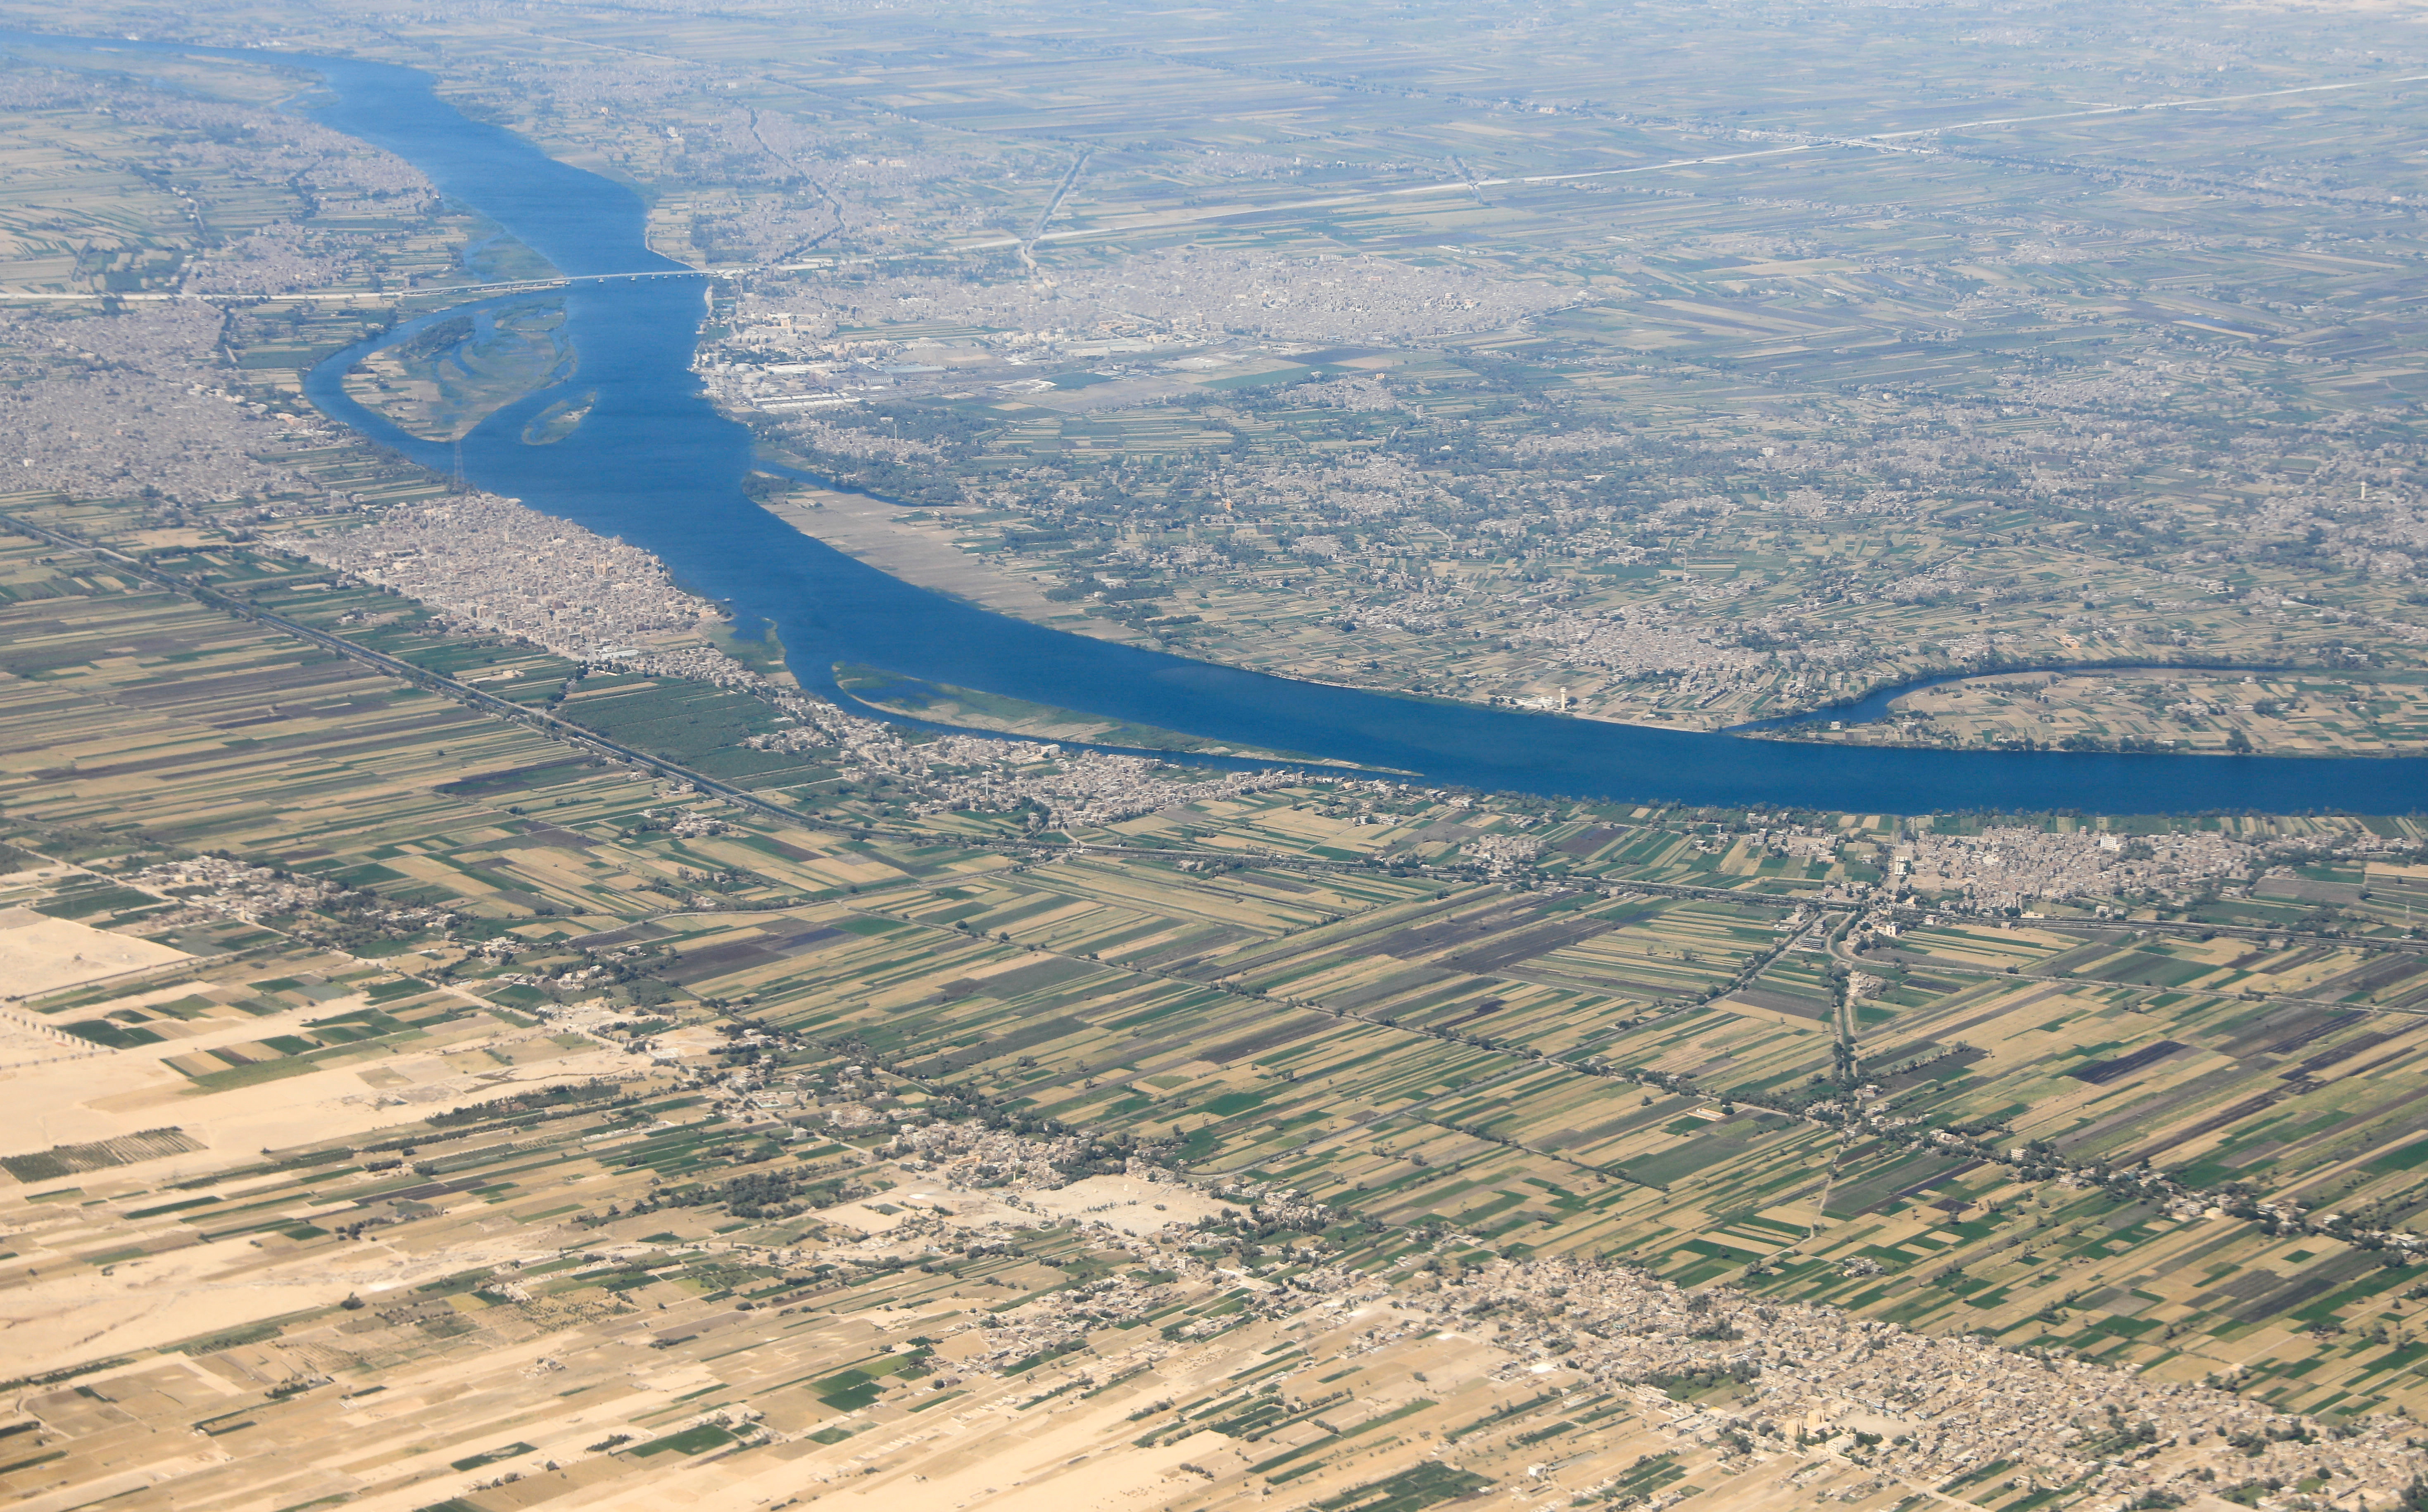 Aerial view of the River Nile valley and desert